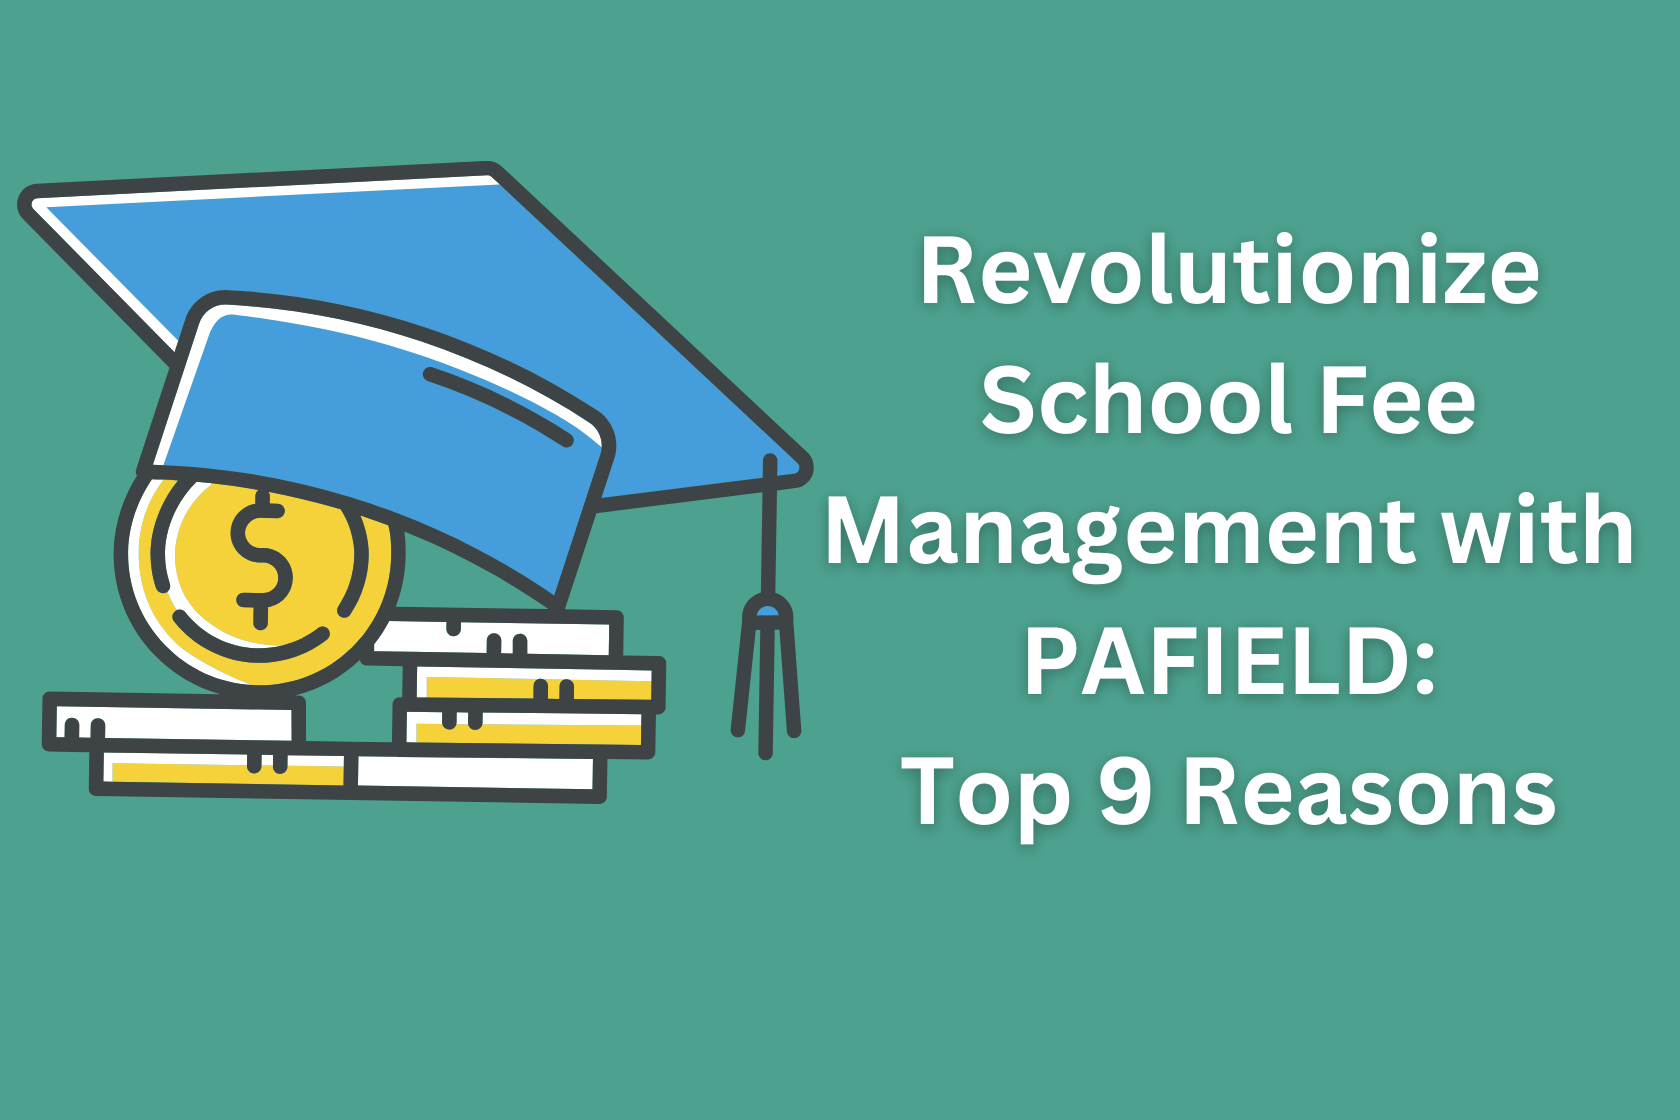 Revolutionize School Fee Management with PAFIELD: Top 9 Reasons